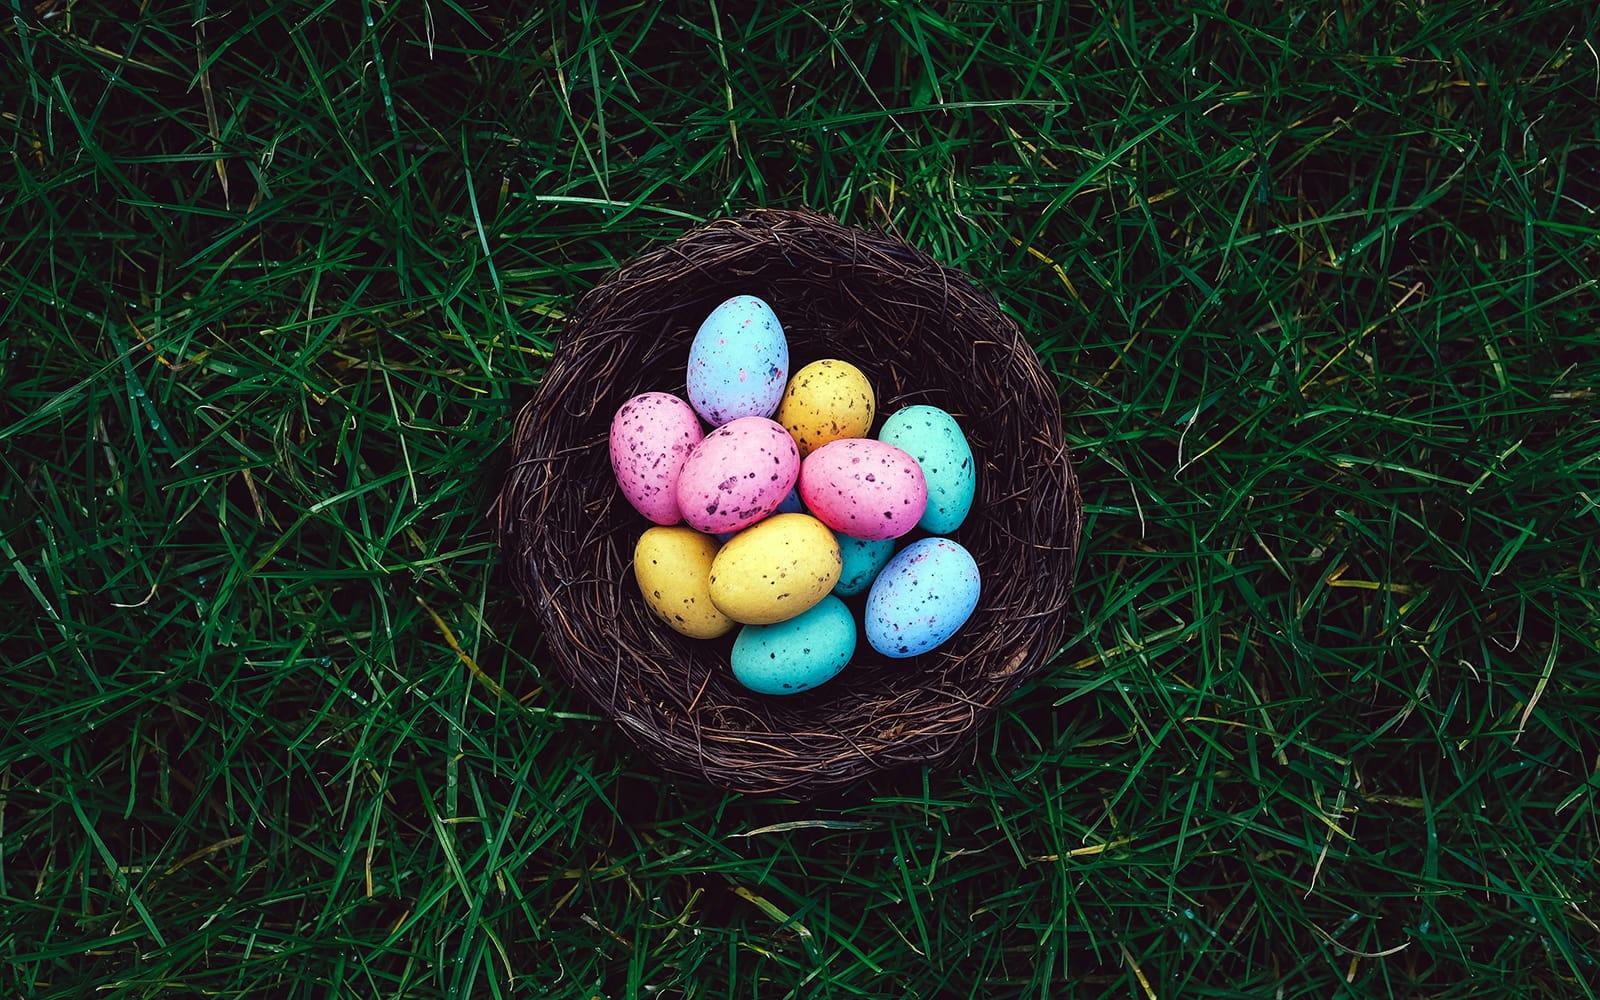 A basket of colorful easter eggs in the grass